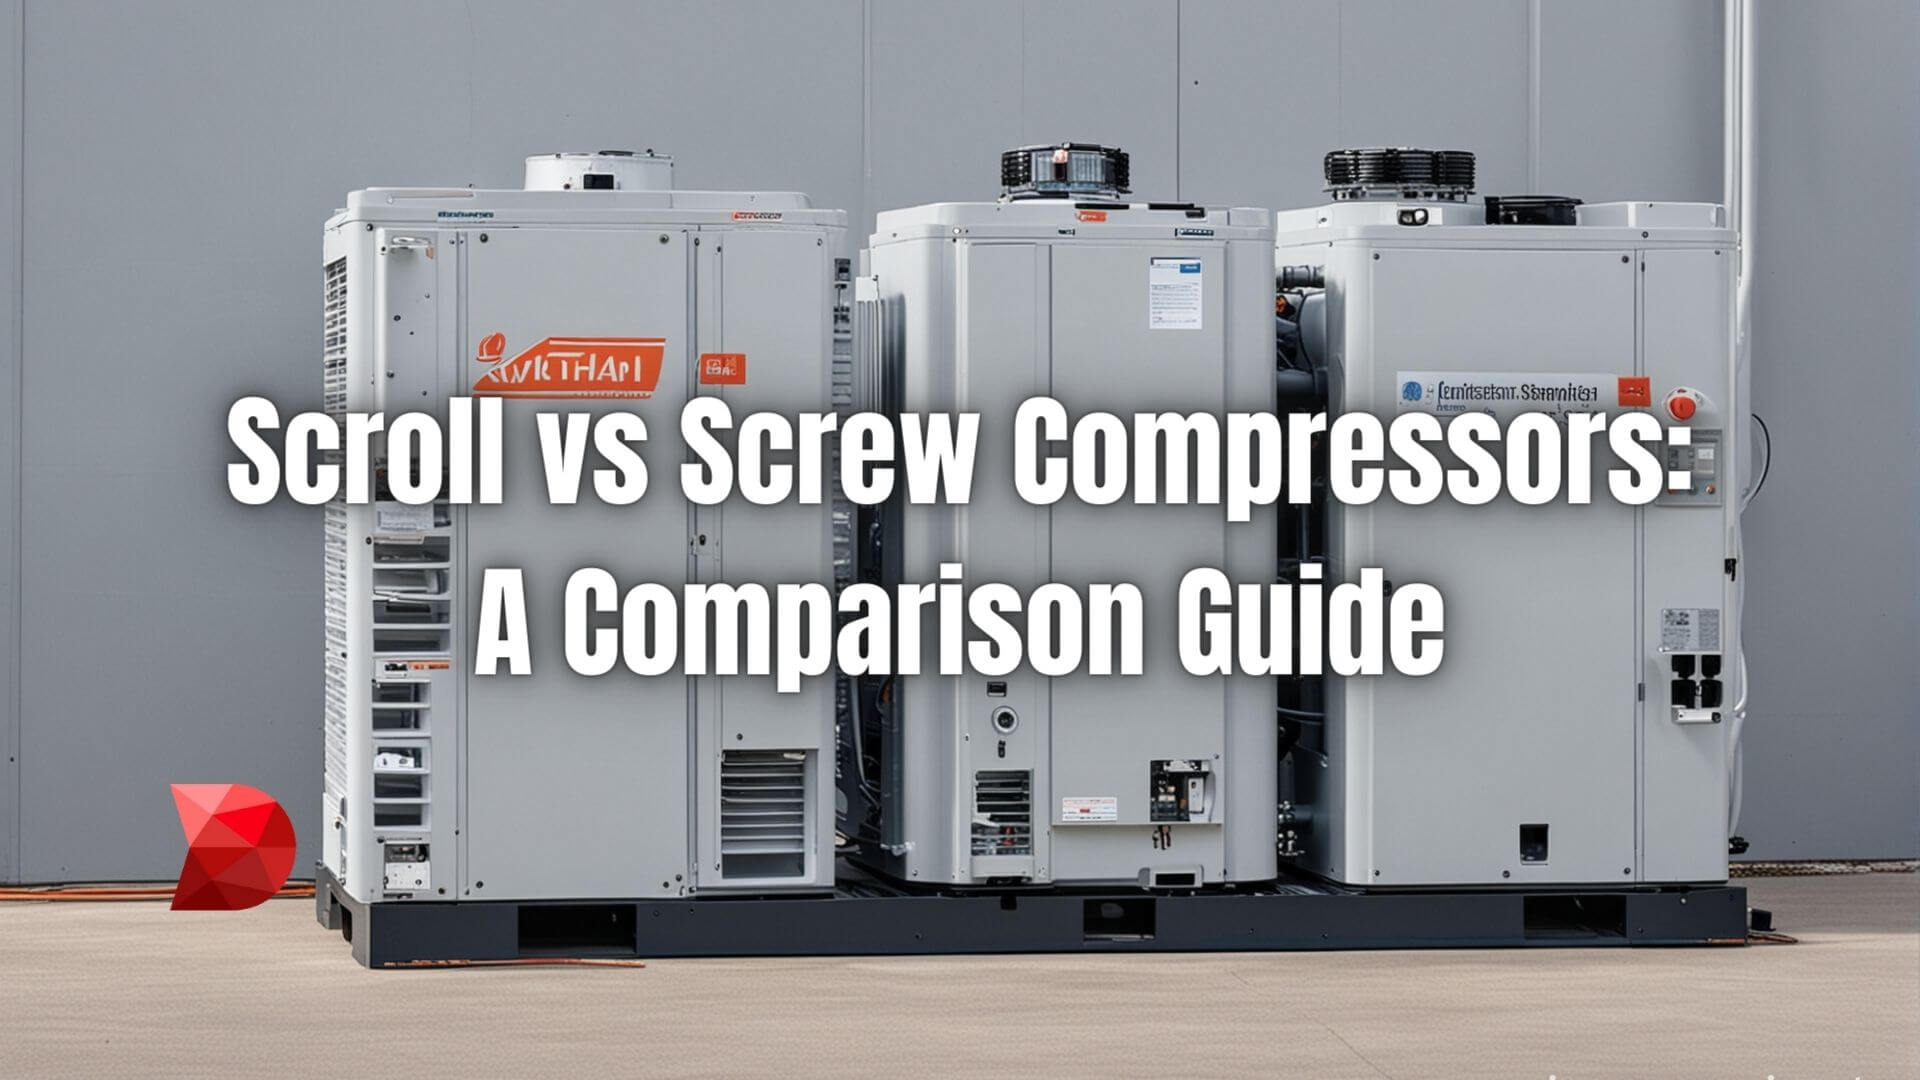 Navigate the complexities of scroll vs. screw compressors with our comparison guide. Make the right choice for your application!